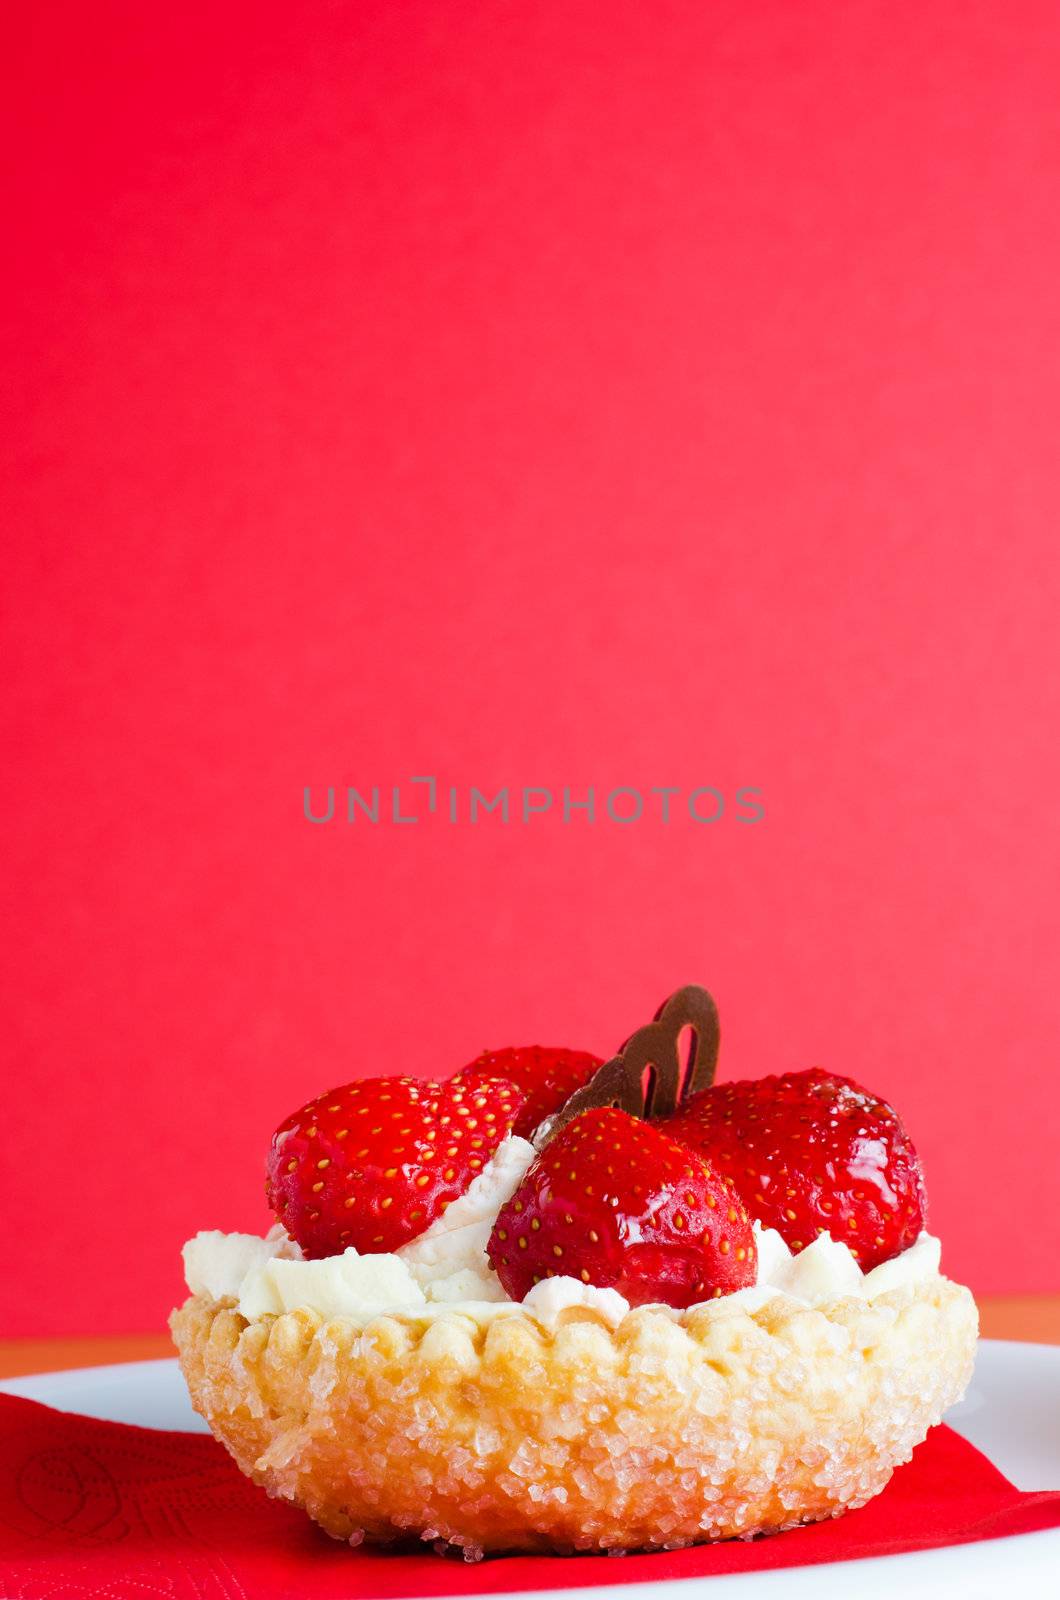 A strawberry and cream pastry cake with chocolate decoration on red napkin and white plate, against a red background.